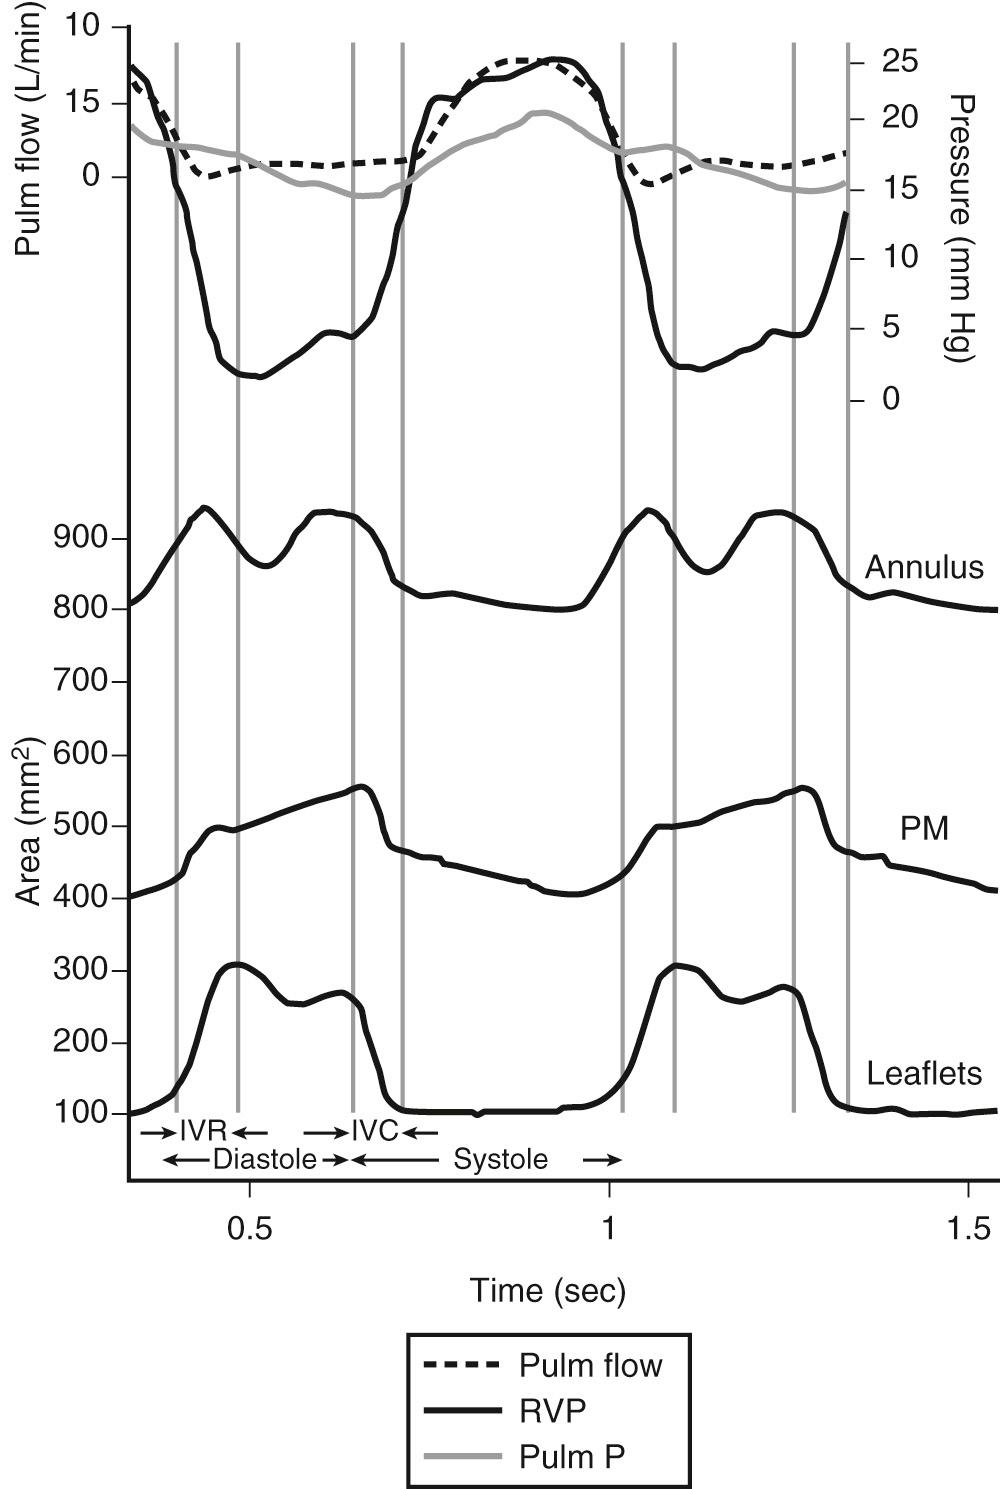 FIGURE 81-1, Changes in the normal tricuspid valve during the cardiac cycle. Top, Pressure curves of blood flow in the pulmonary artery (Pulm flow), the right ventricle (RVP), and the pulmonary artery (Pulm P). Bottom, Changes in the areas delineated by the ultrasound transducers placed around the tricuspid annulus (Annulus), the tips of the three papillary muscles (PM), and the free edges of the three leaflets (Leaflets) during two cardiac cycles. These recordings allowed the cardiac cycle to be split into diastole, systole, isovolumic contraction (IVC), and isovolumic relaxation (IVR).